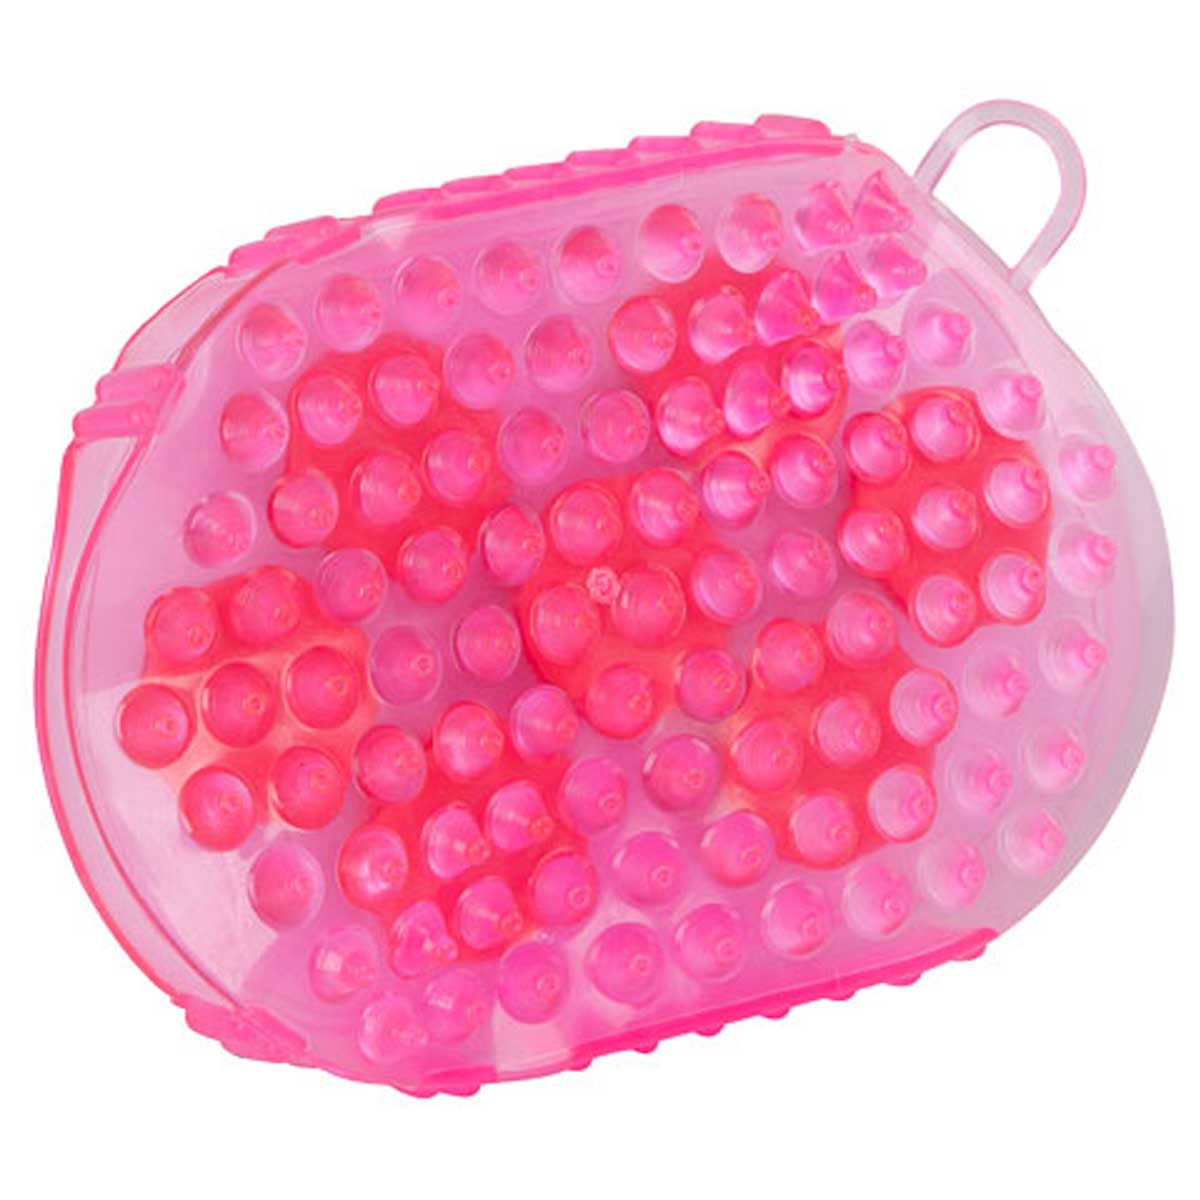 Magnet massage curry comb pink